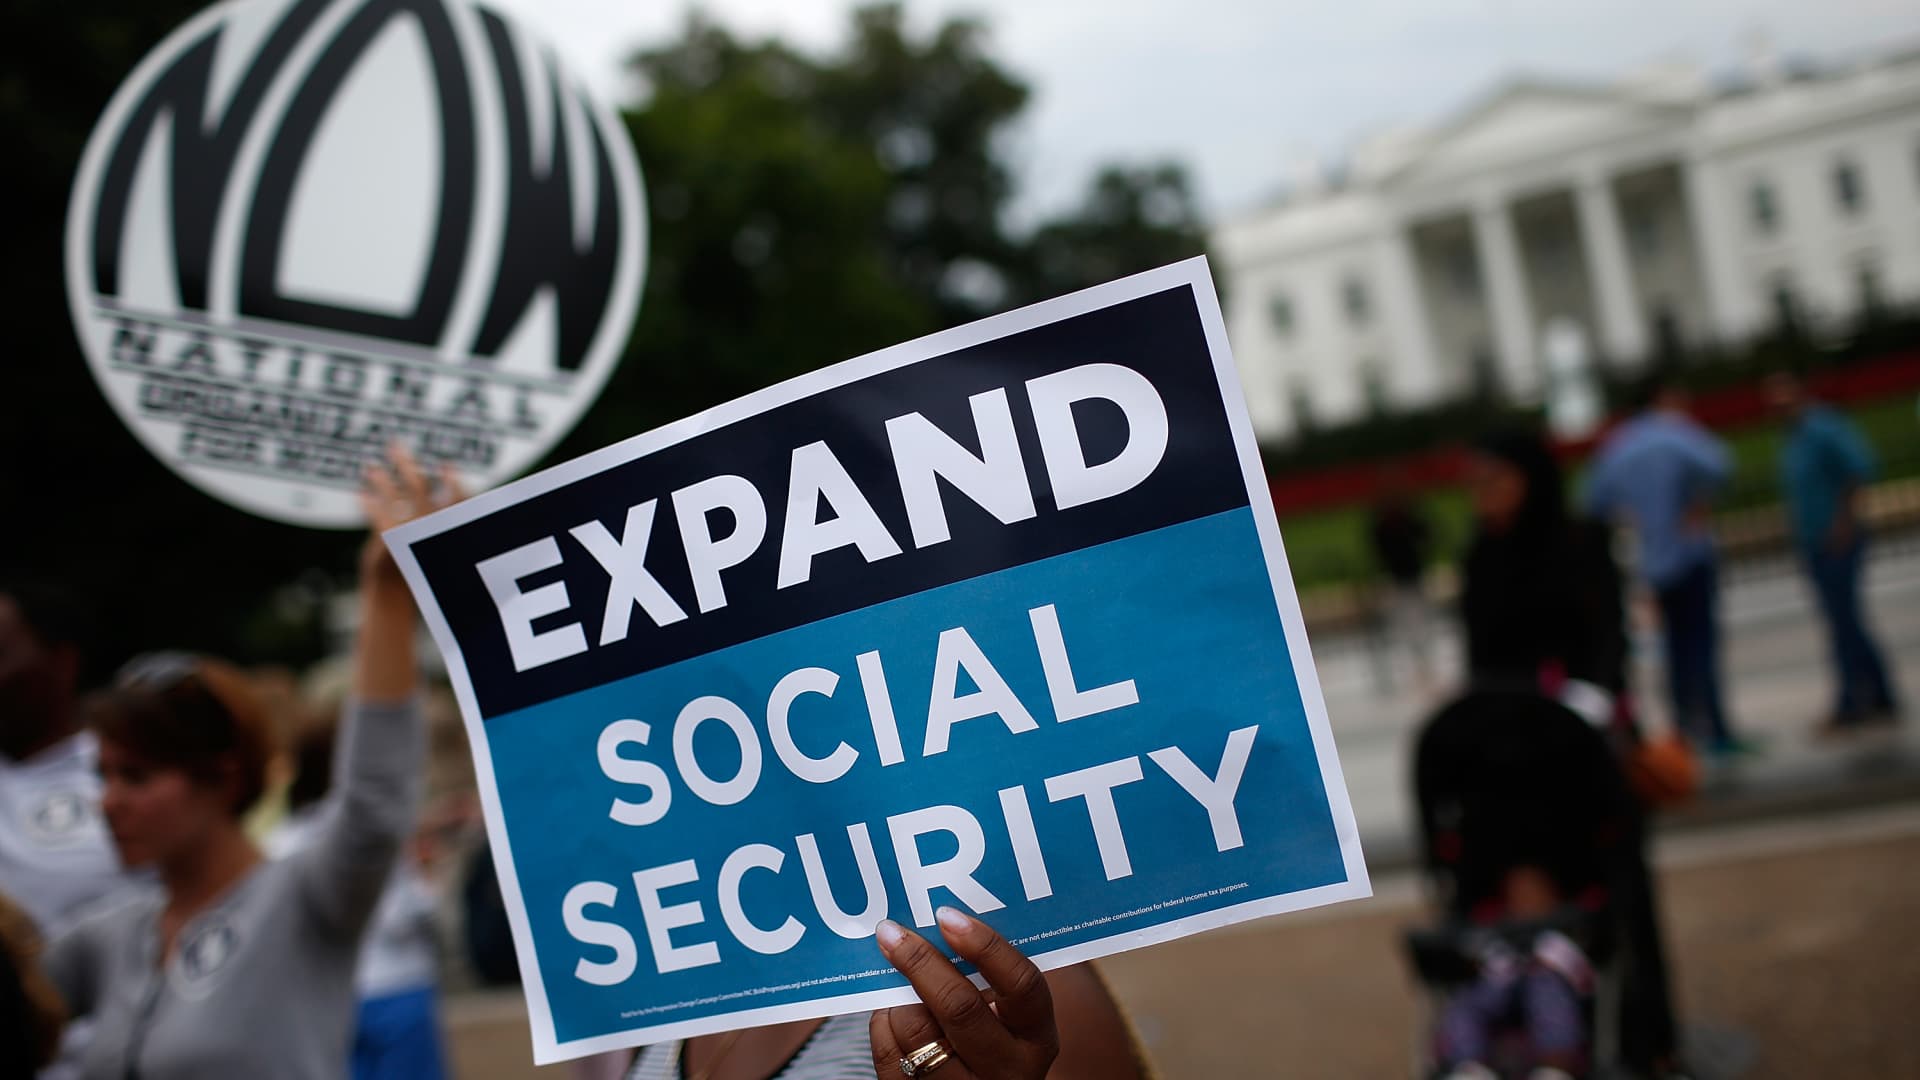 With 13 years until Social Security’s funds are projected to run out, Washington..